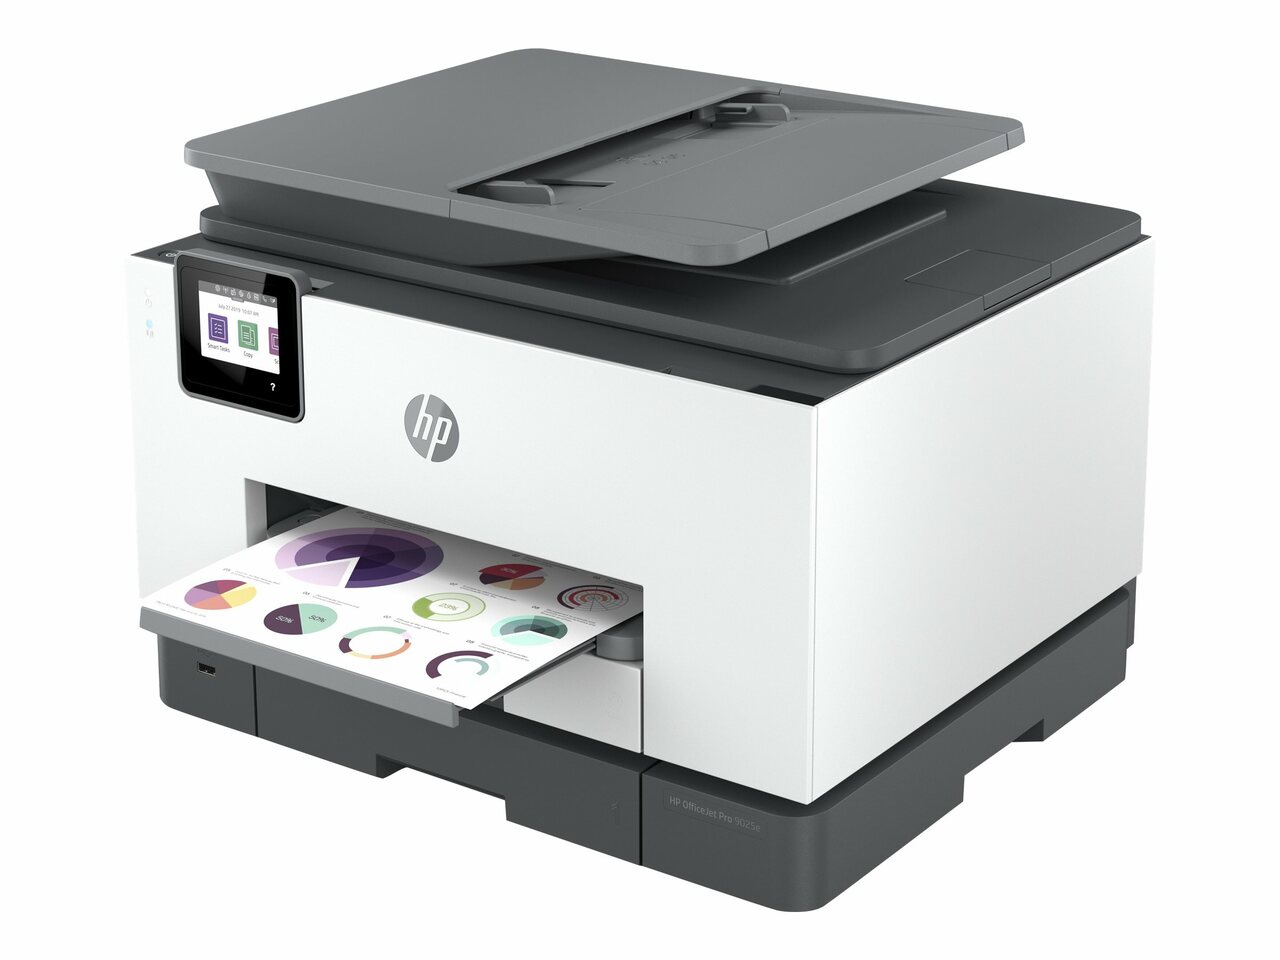 Best Printers for Cardstock & Thick Papers in 2023